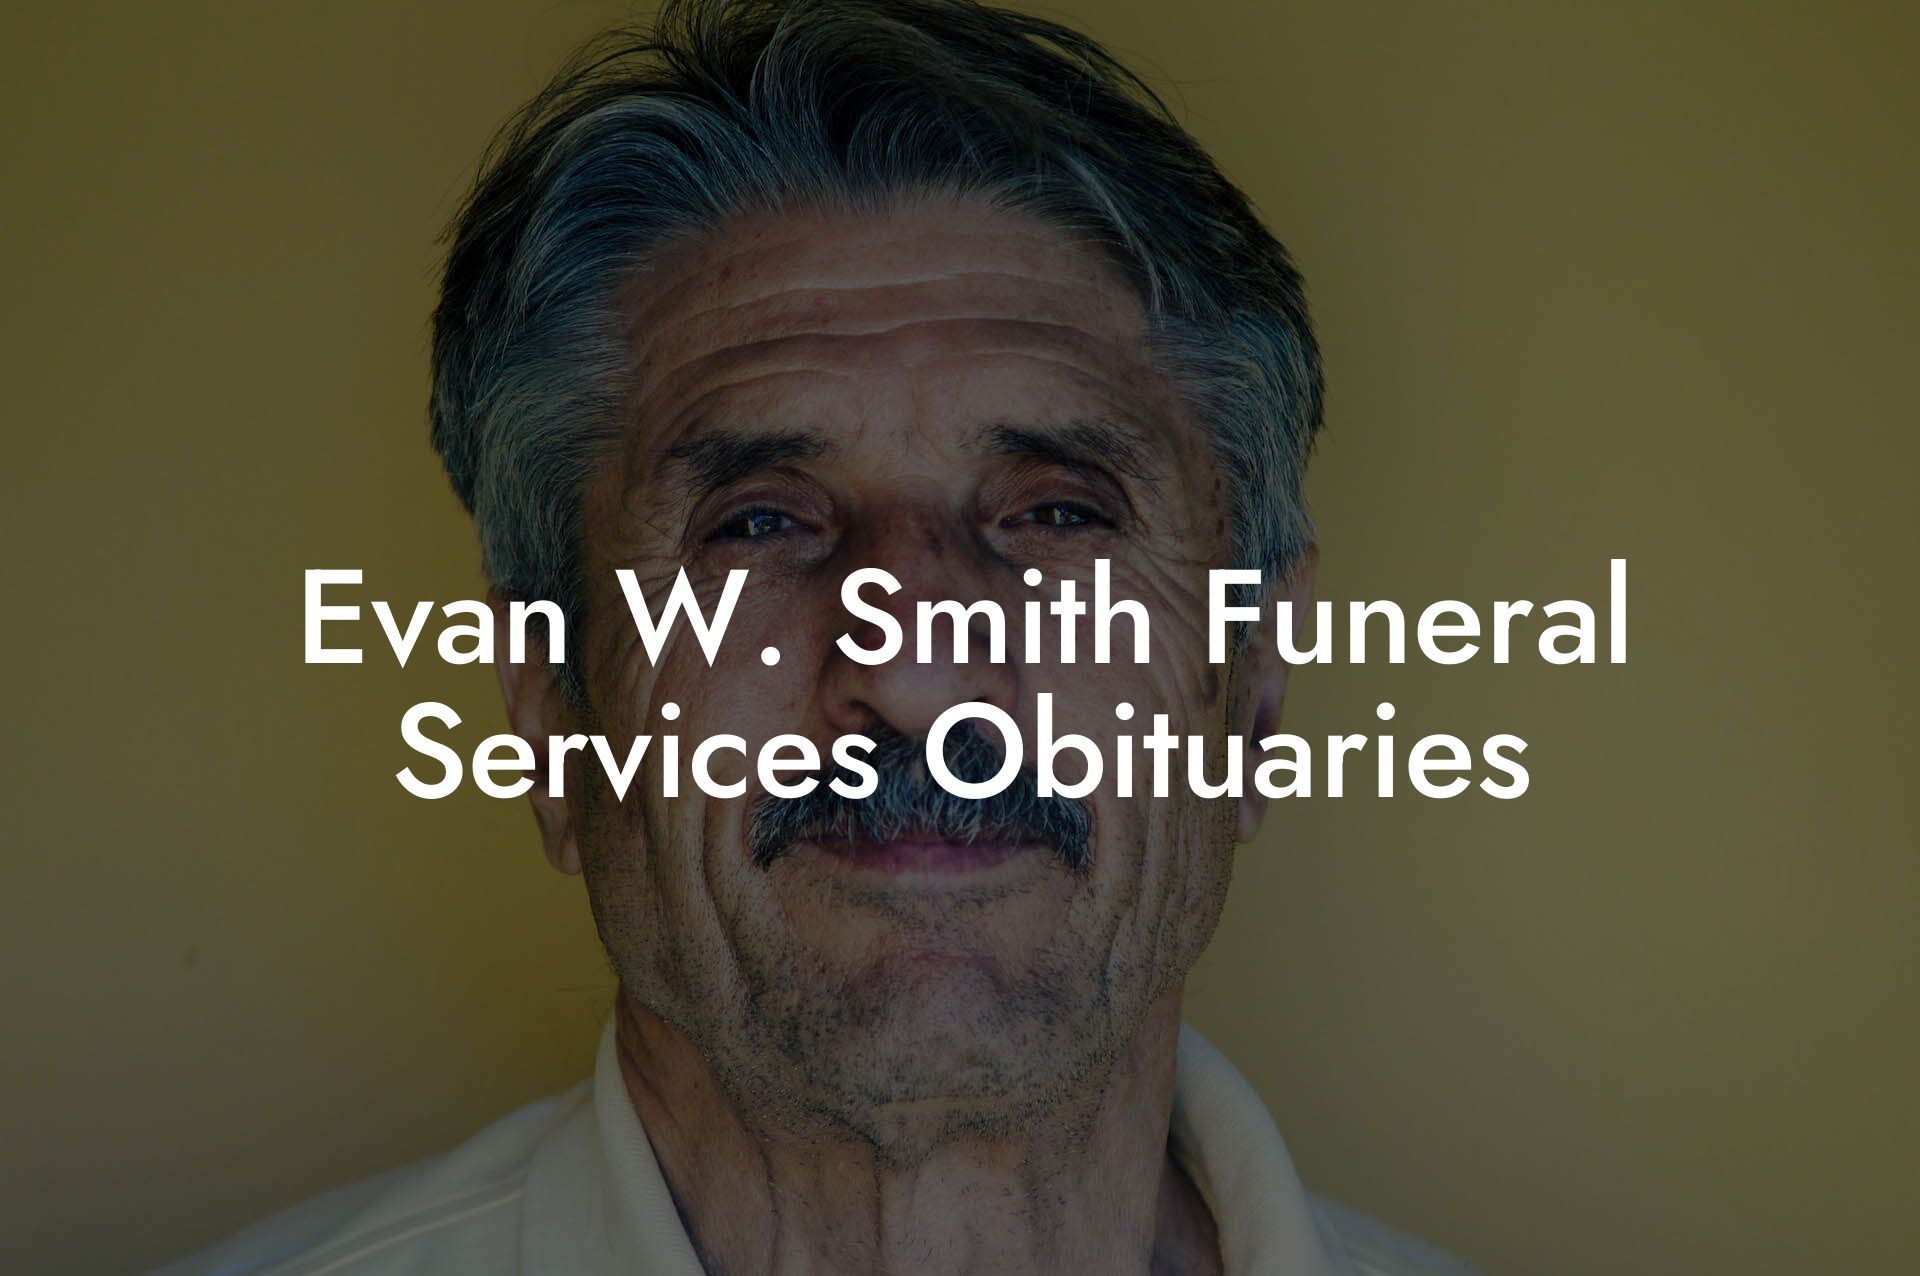 Evan W. Smith Funeral Services Obituaries